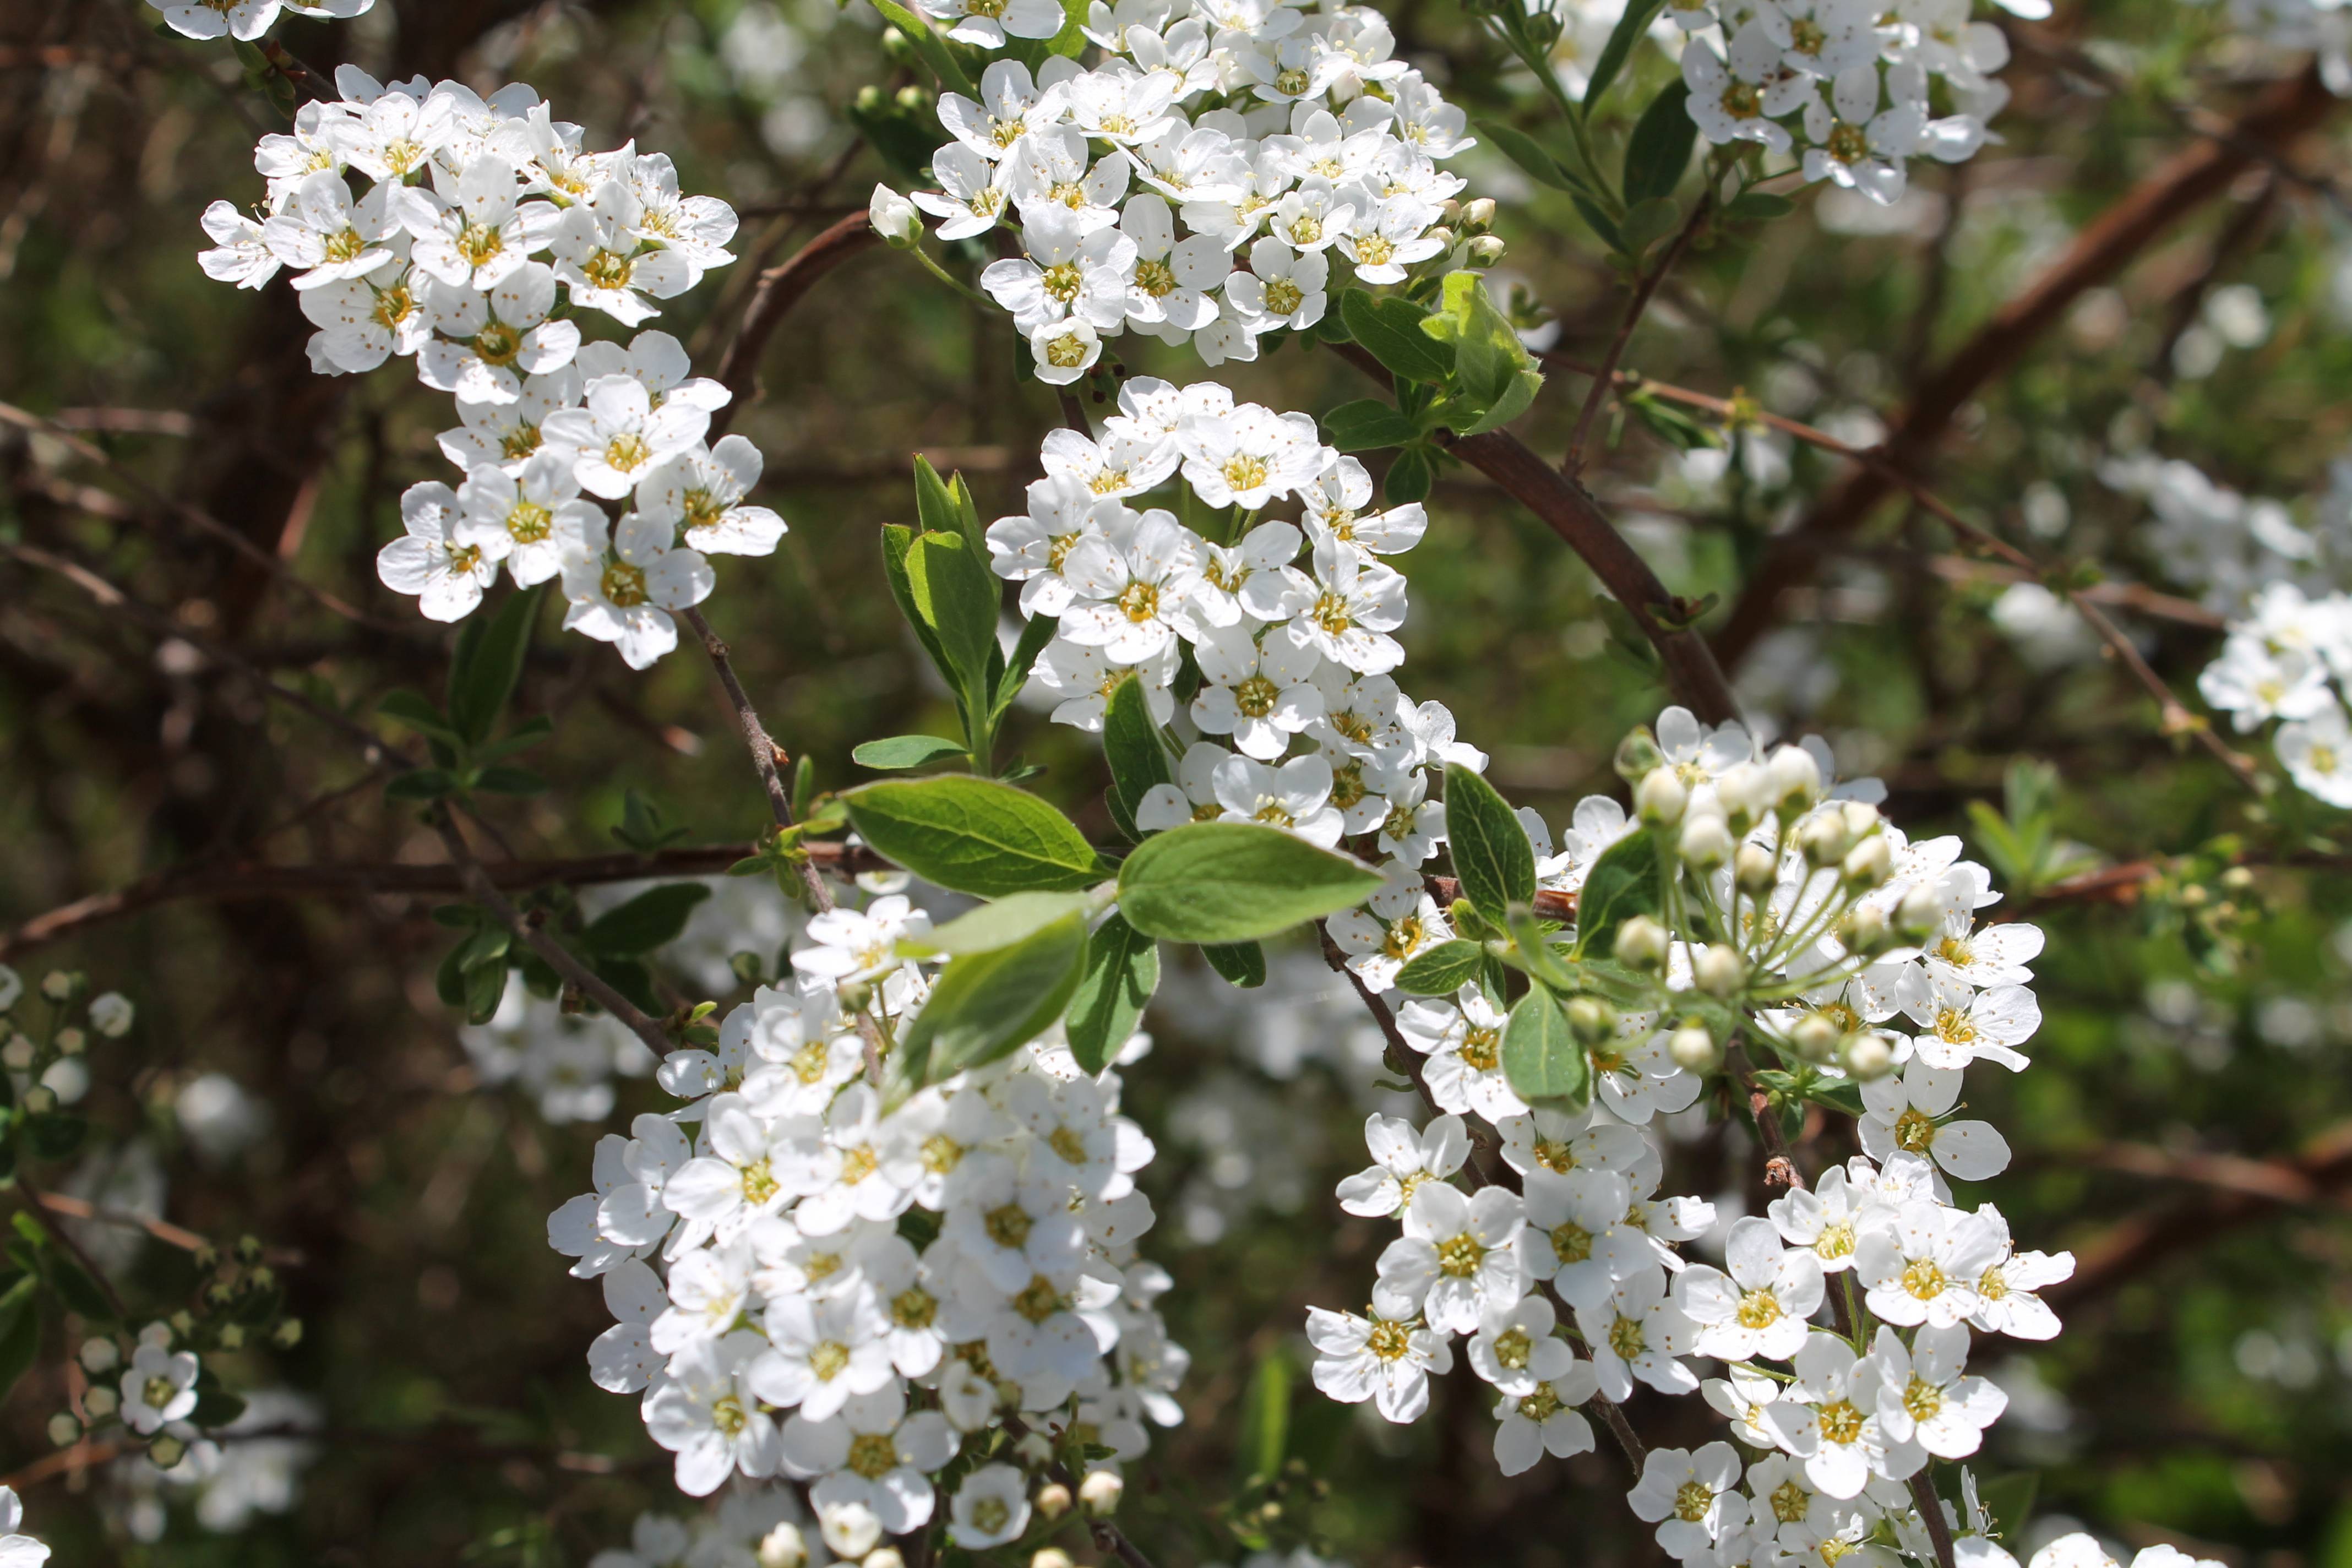 white flowers with yellow center, white buds, green leaves and brown branches